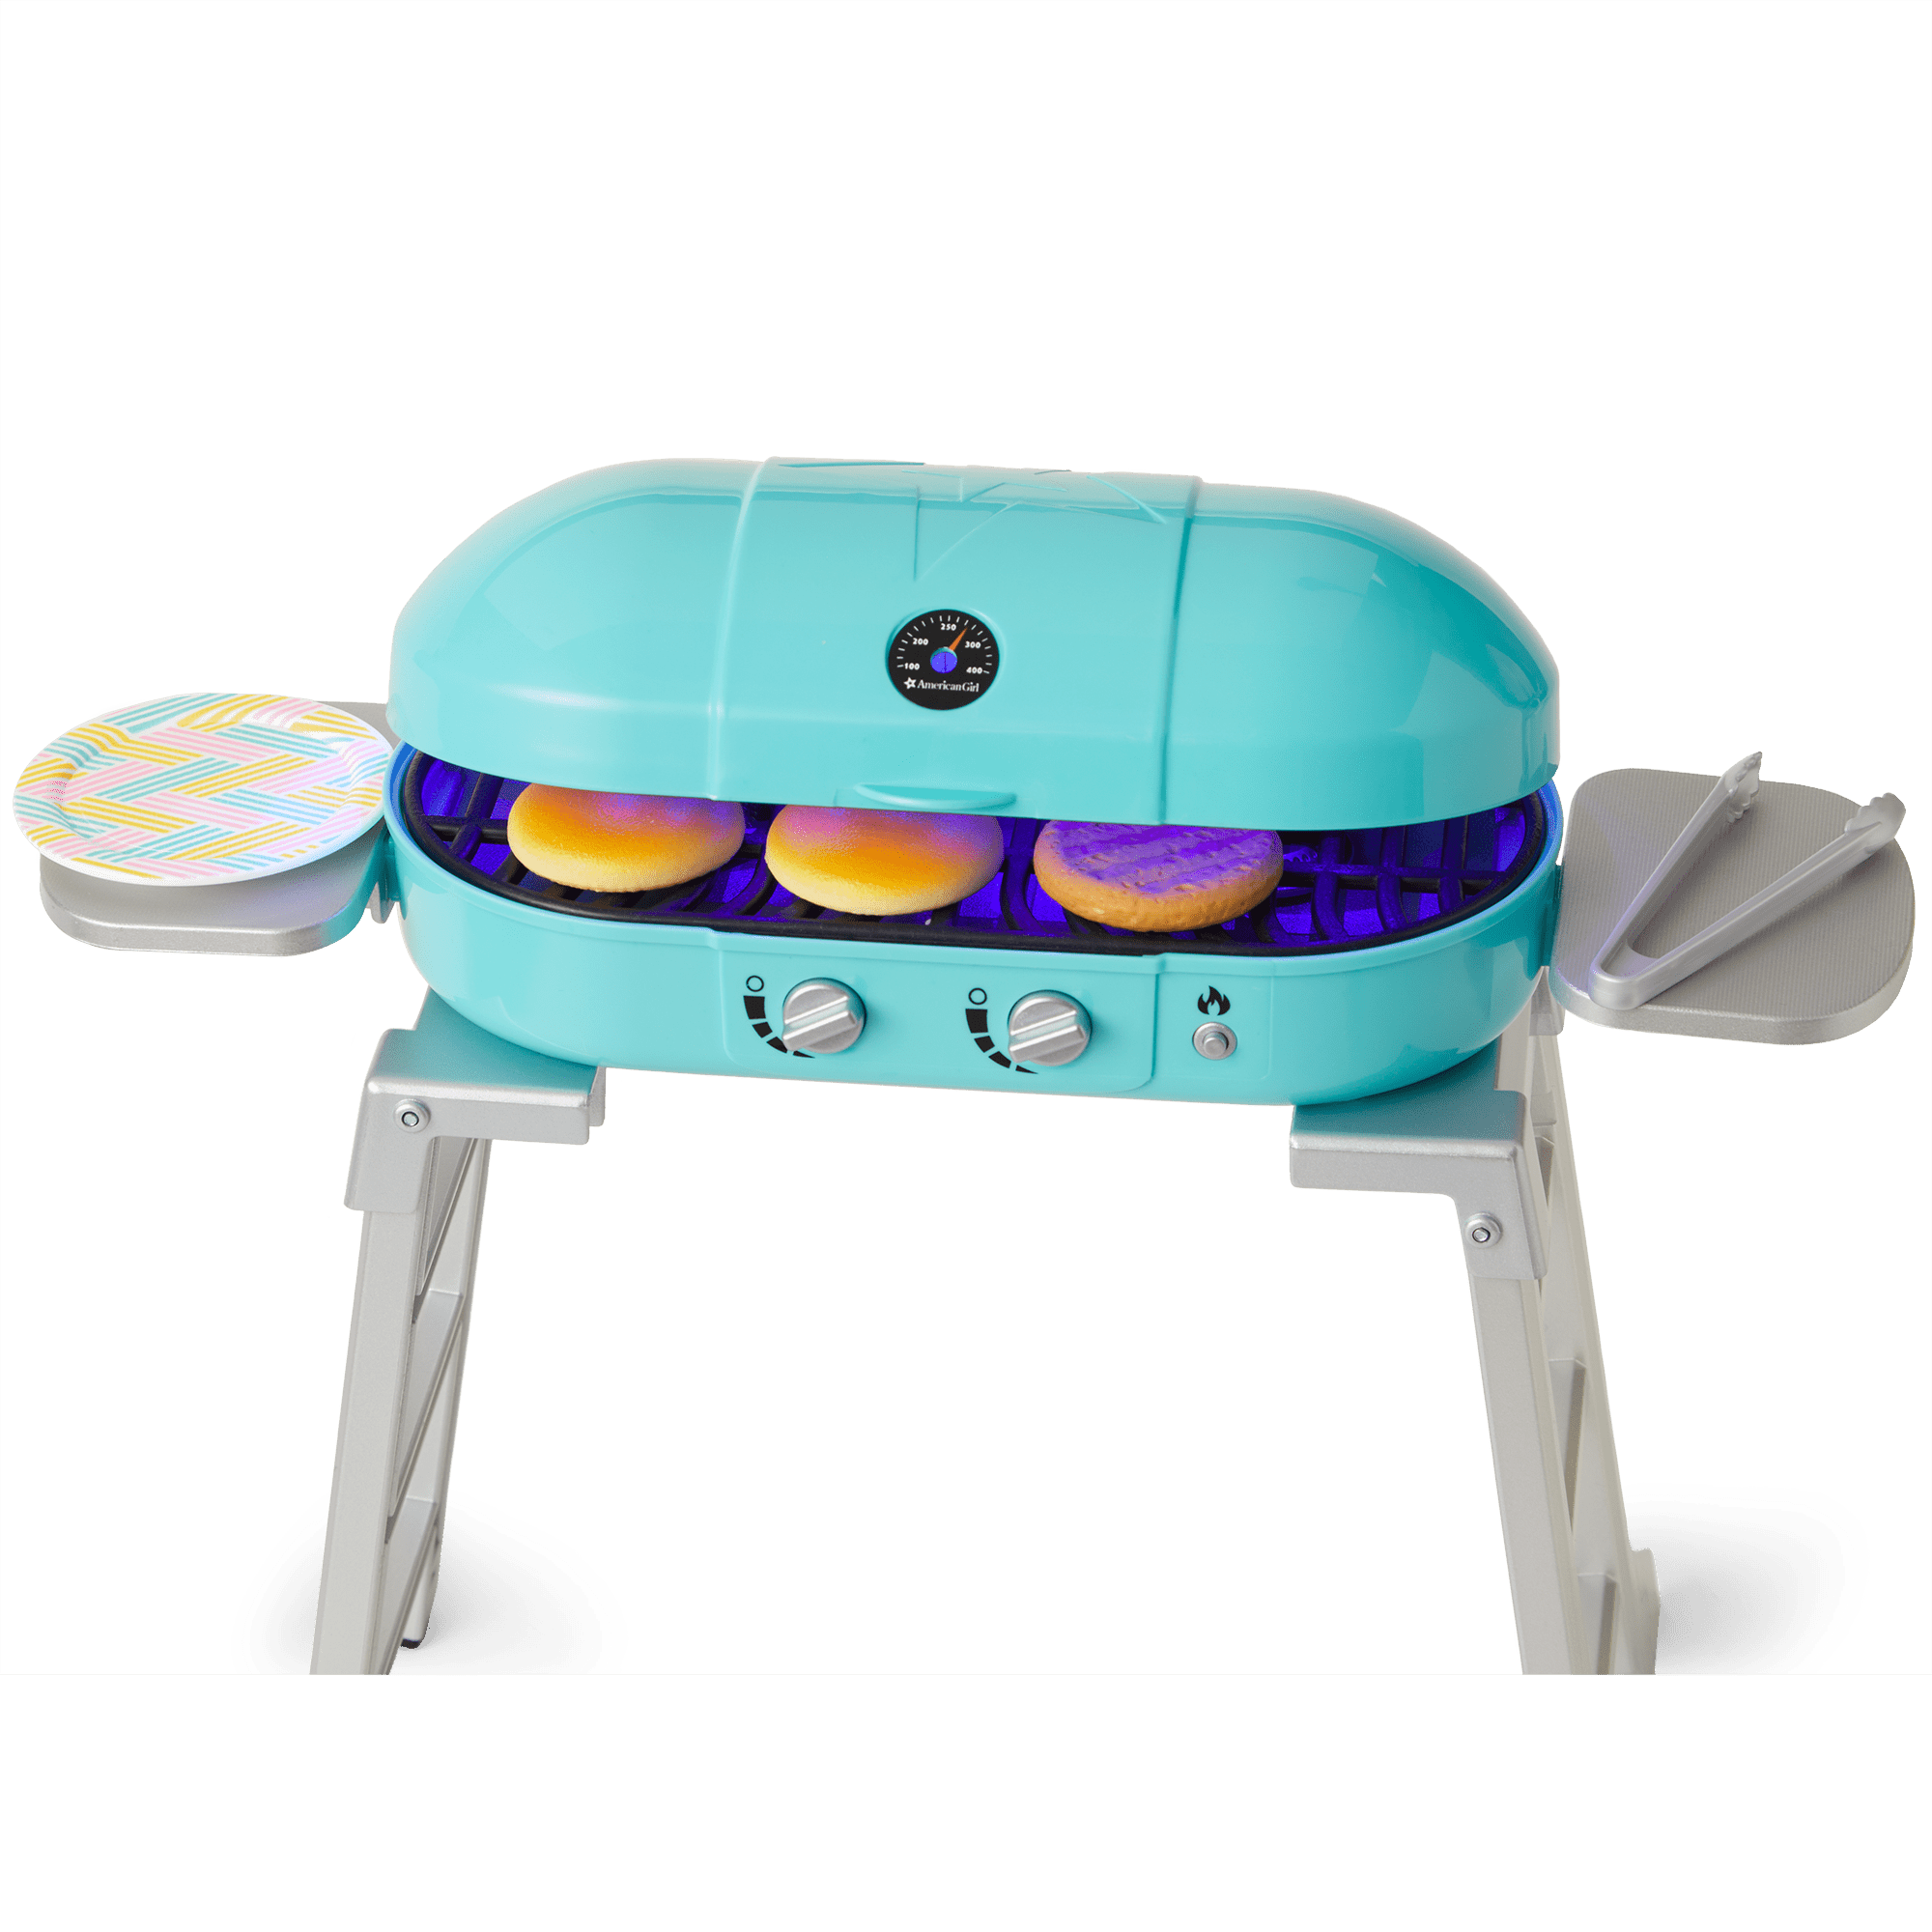 American Girl® Grill & Games Set for 18-inch Dolls